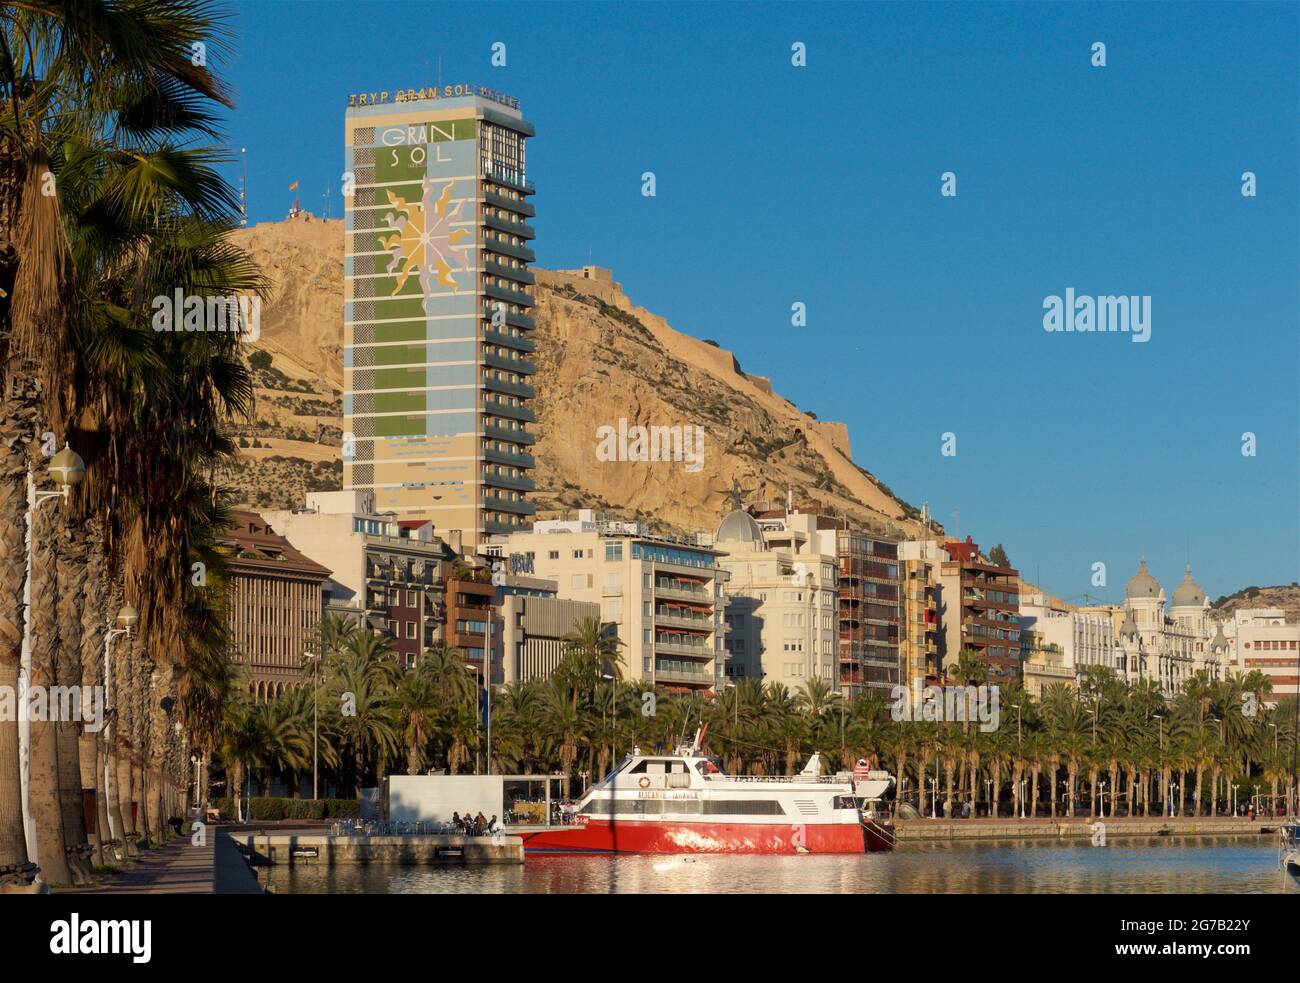 Palm-tree-lined Alicante promenade alongside the marina, Alicante, Valencia, Spain. The 97m high Gran Sol building beyond. Also known as Hotel Gran Sol, Hotel Tryp Gran Sol and officially Edificio Alonso. Mount Benacantil in the background Stock Photo